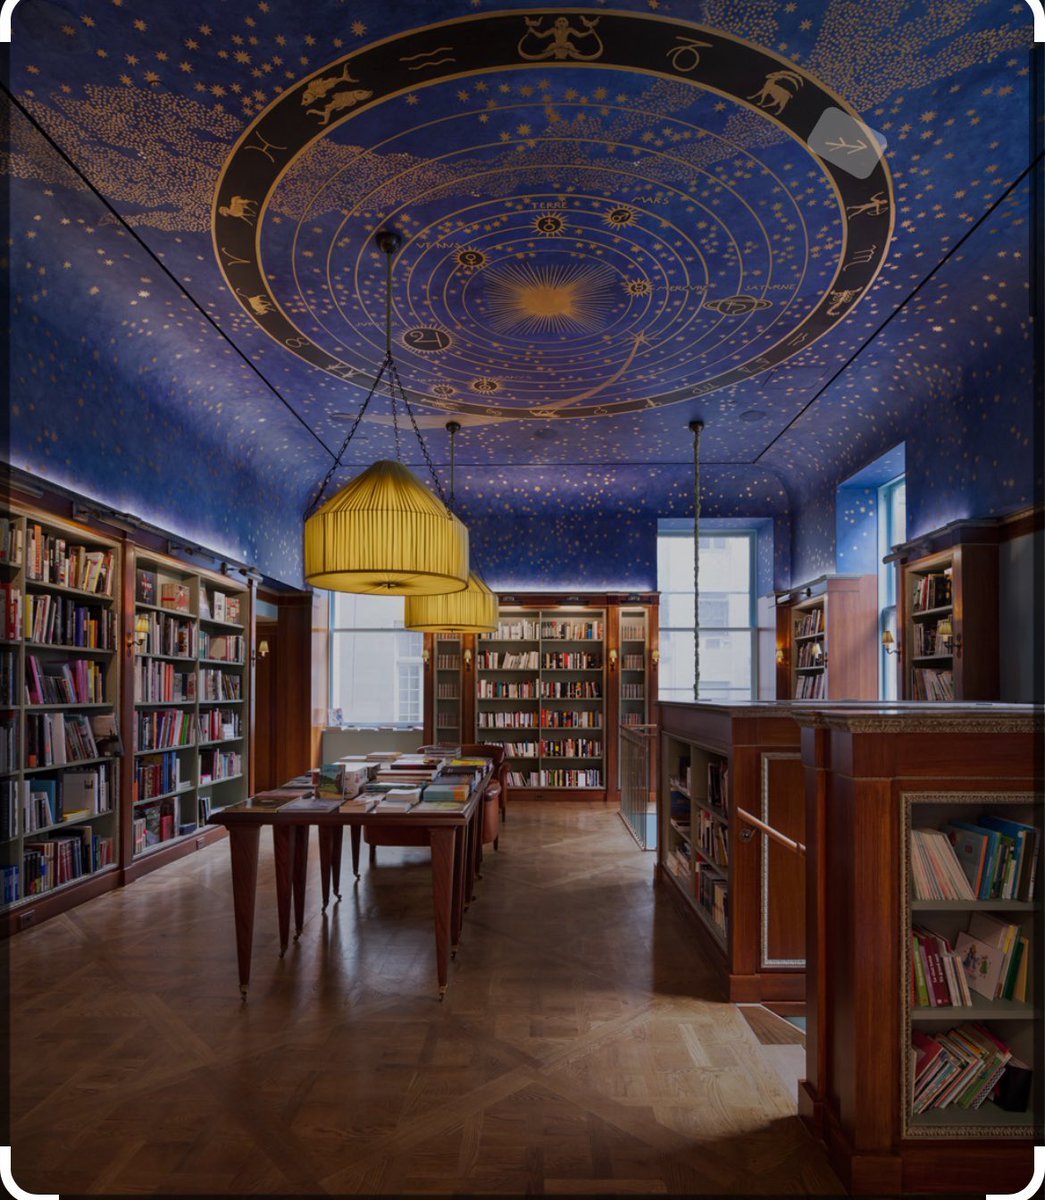 Did you know about this beautiful NYC bookstore run by France? I just found out when agreeing to speak there about AI on Monday. Come join! villa-albertine.org/events/can-jou…